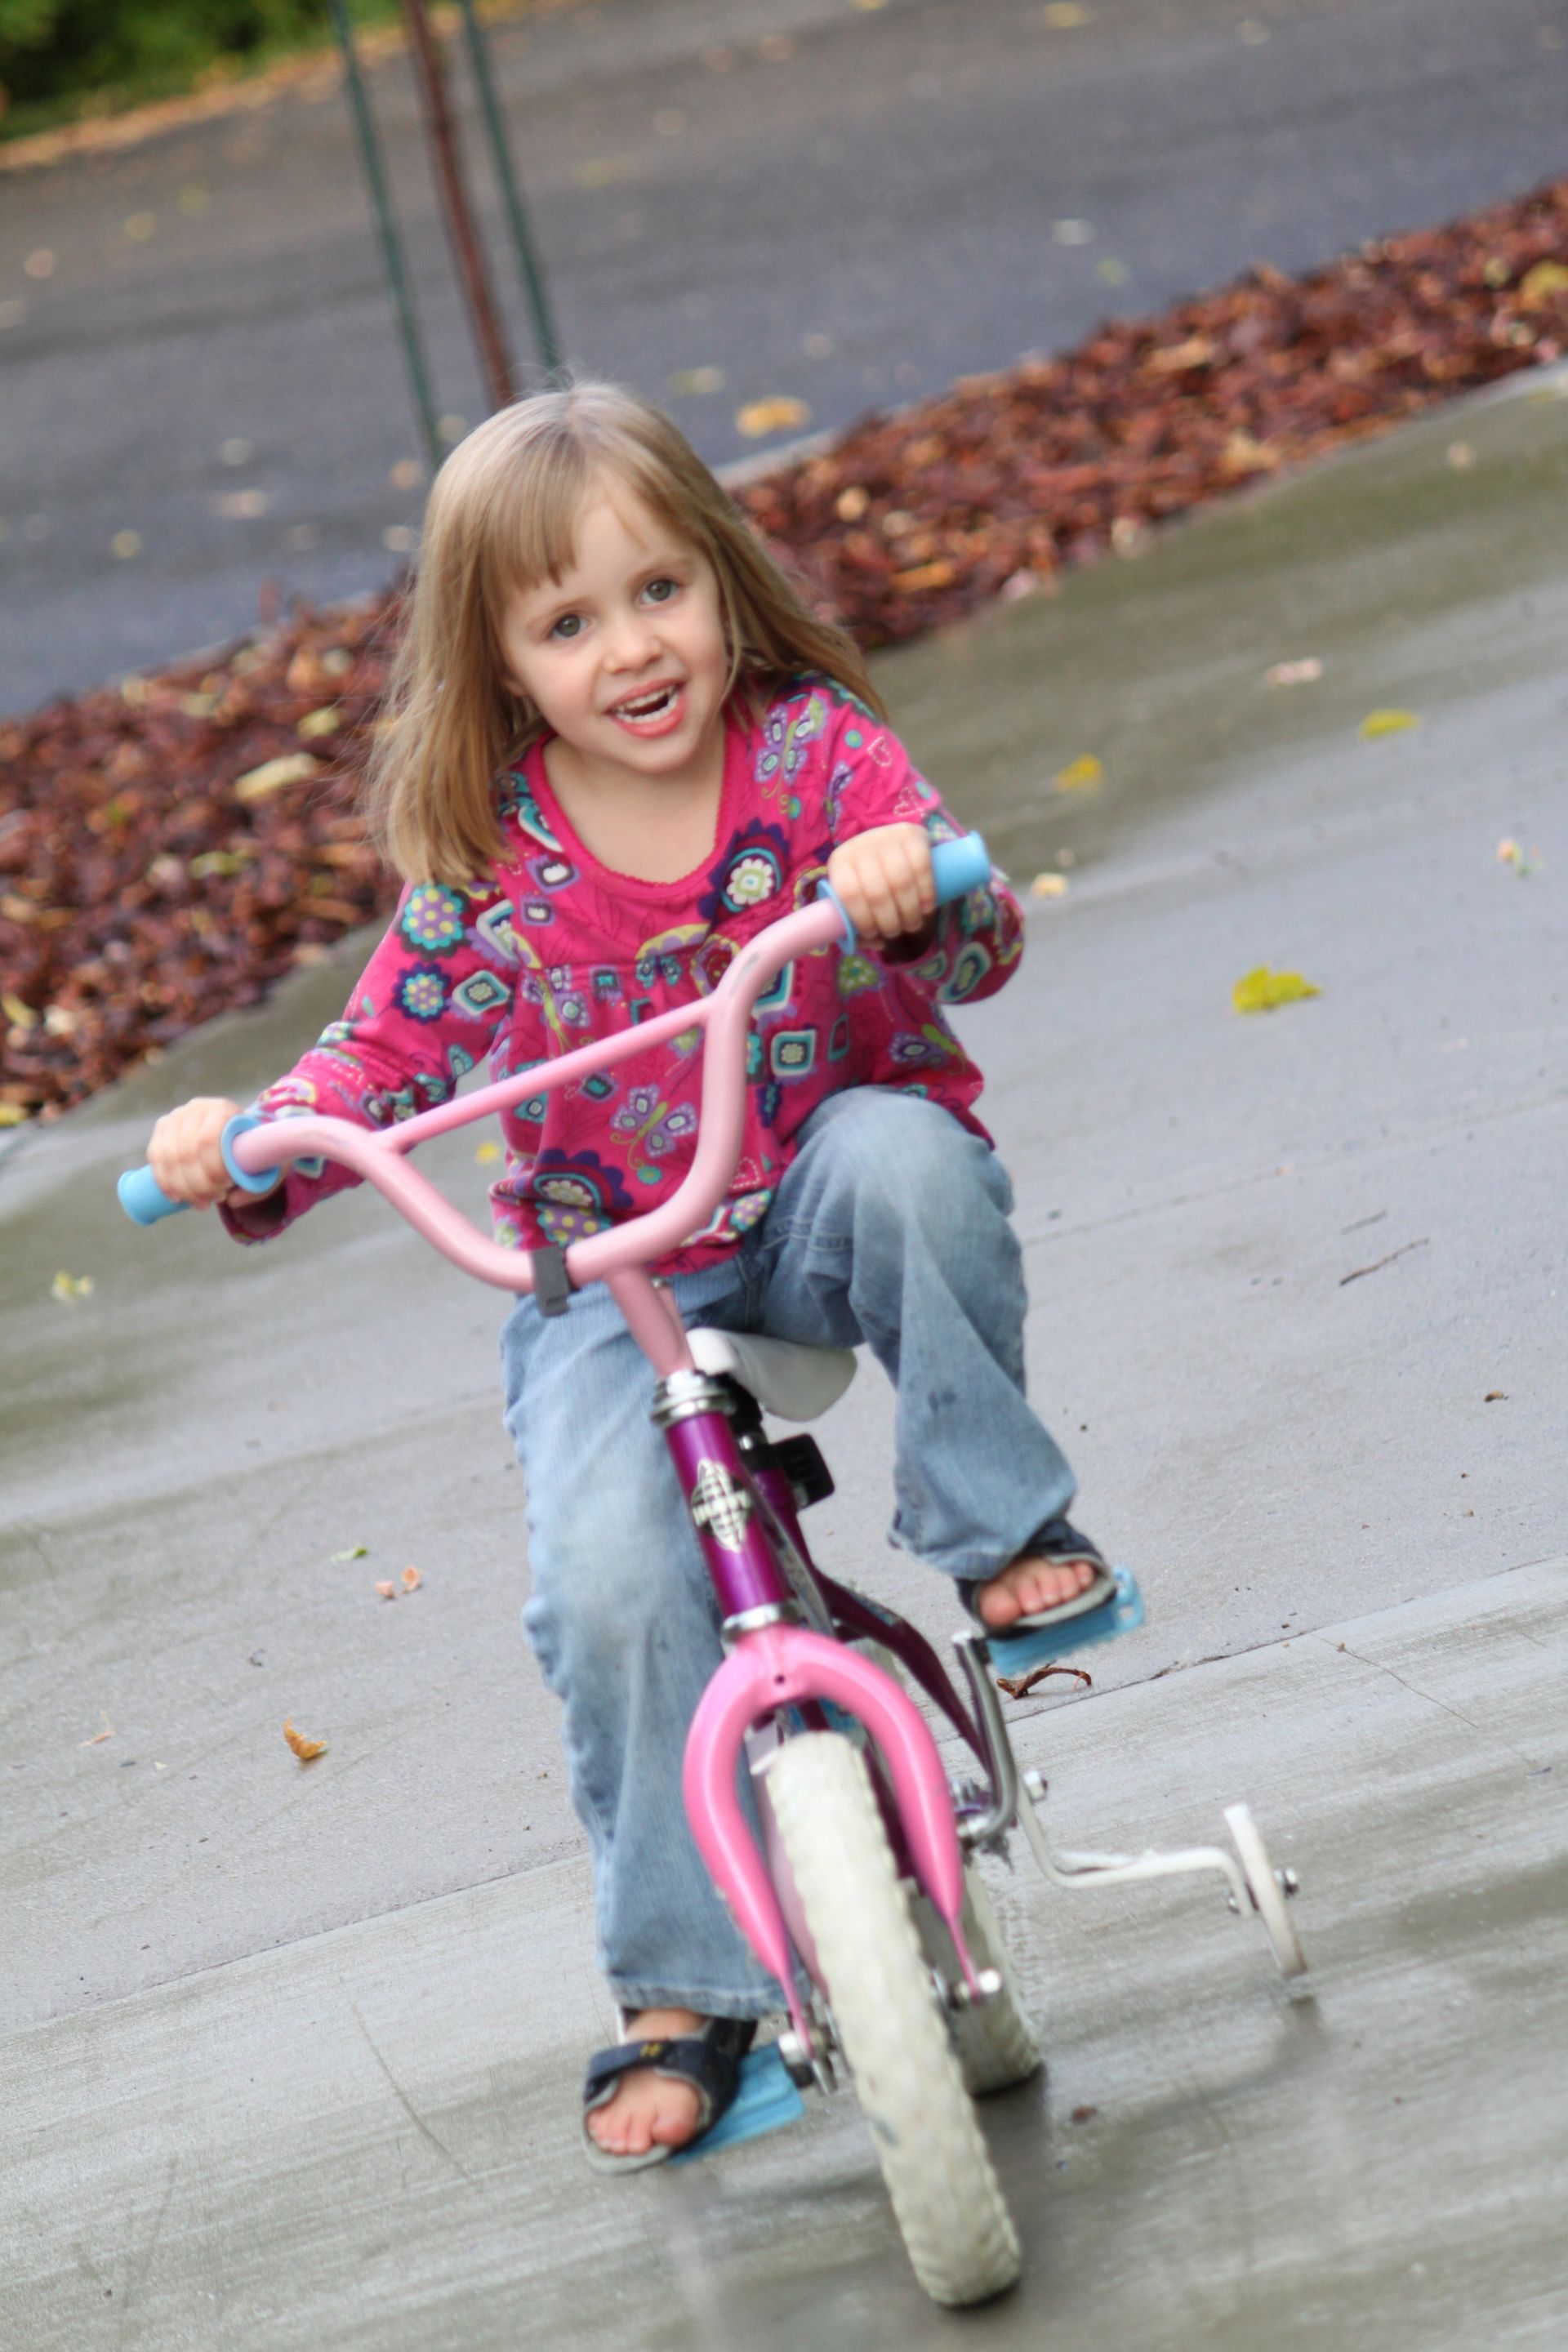 A portrait of a young girl on a bike.